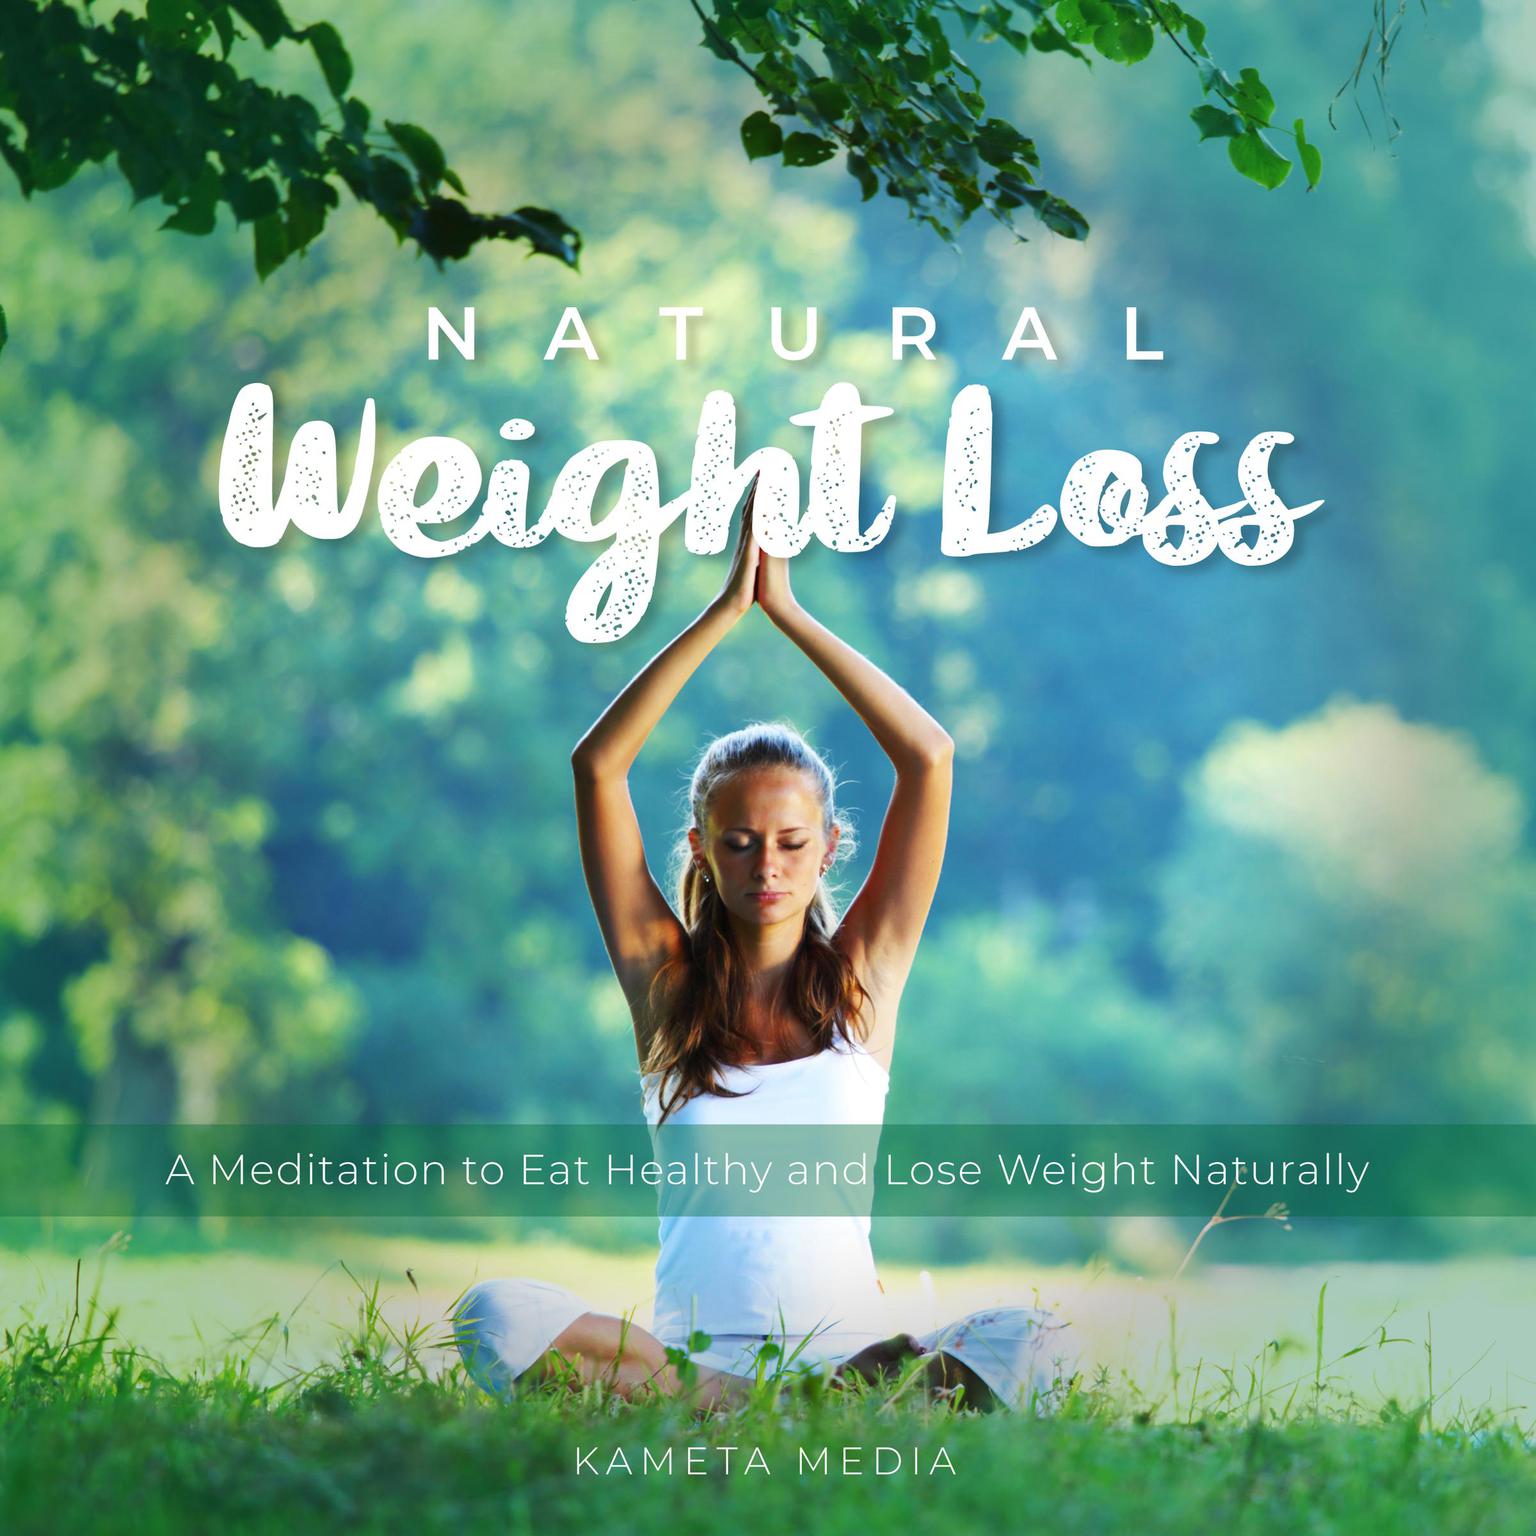 Natural Weight Loss: A Meditation to Eat Healthy and Lose Weight Naturally Audiobook, by Kameta Media